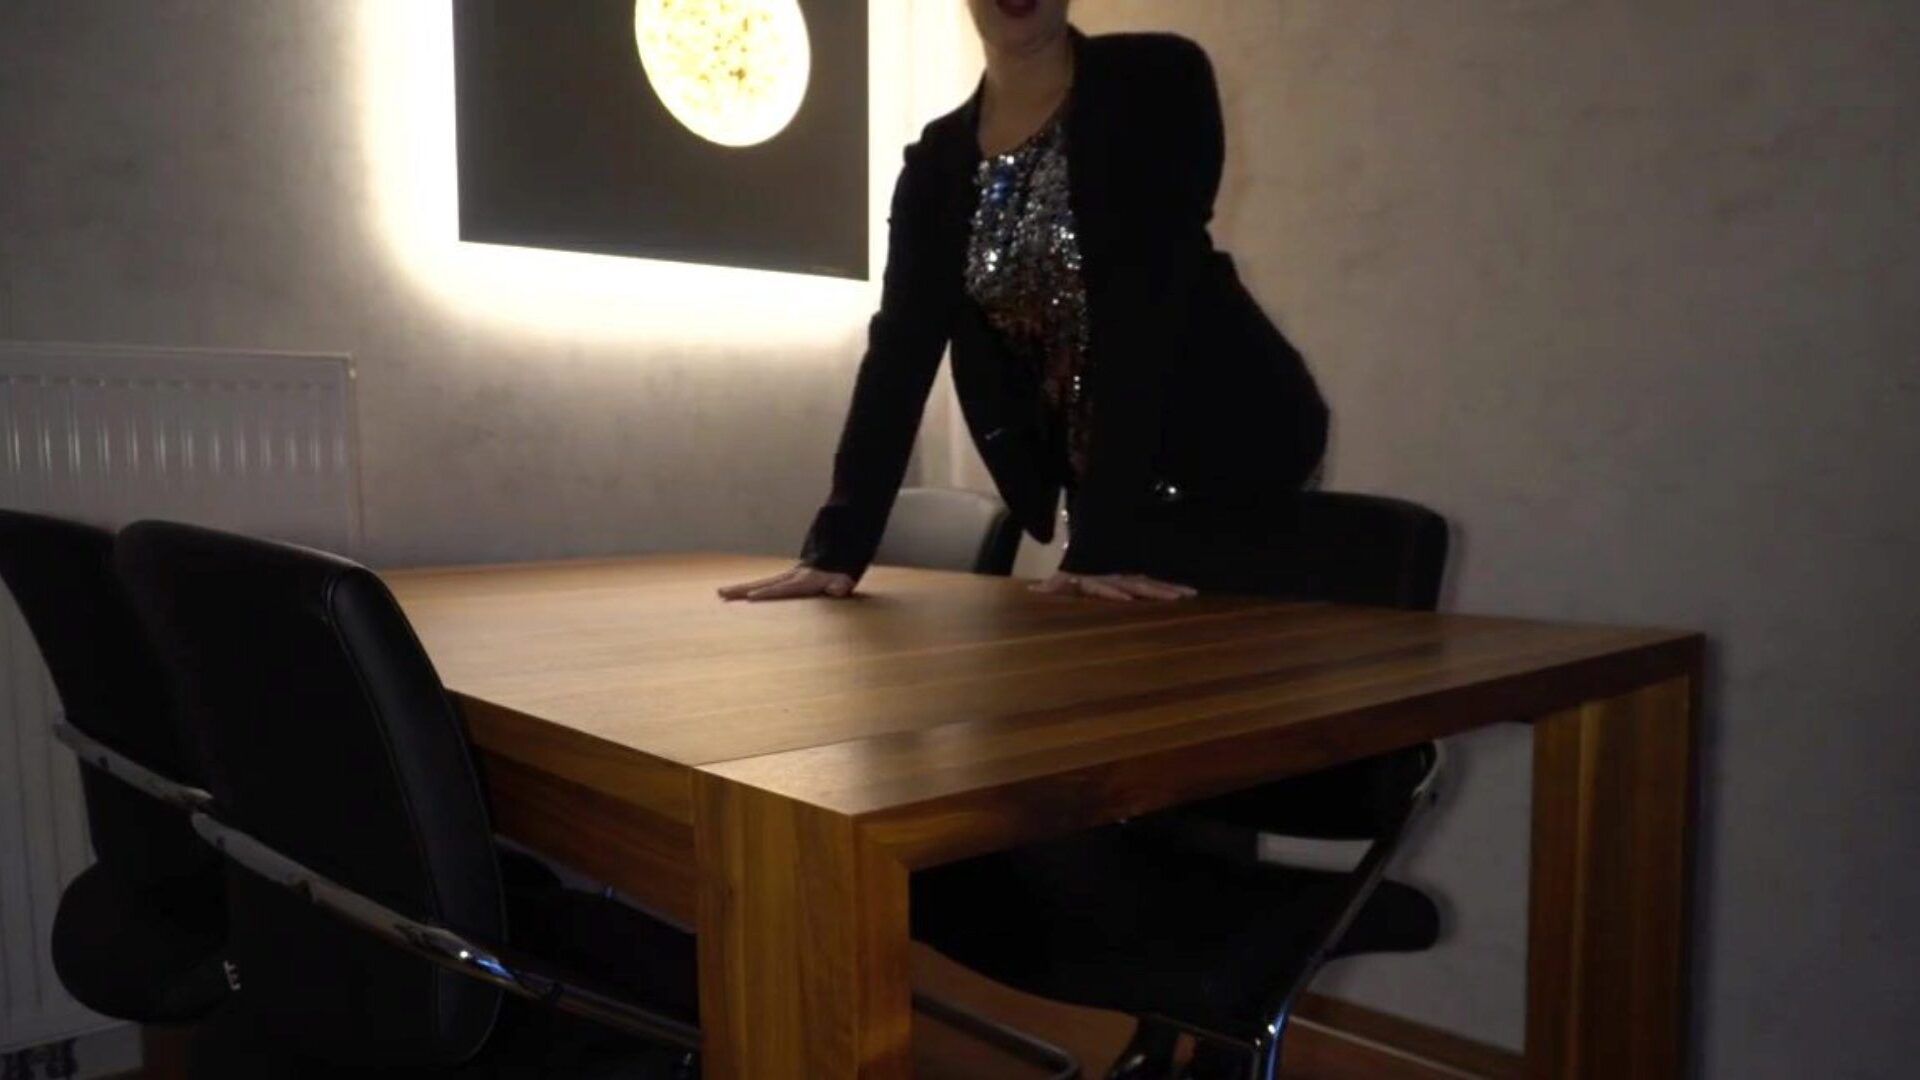 Boss Fucks Secretary Anally on the Table... Watch Boss Fucks Secretary Anally on the Table - Business-bitch episode on xHamster - the ultimate collection of free Danish MILF HD pornography tube vids